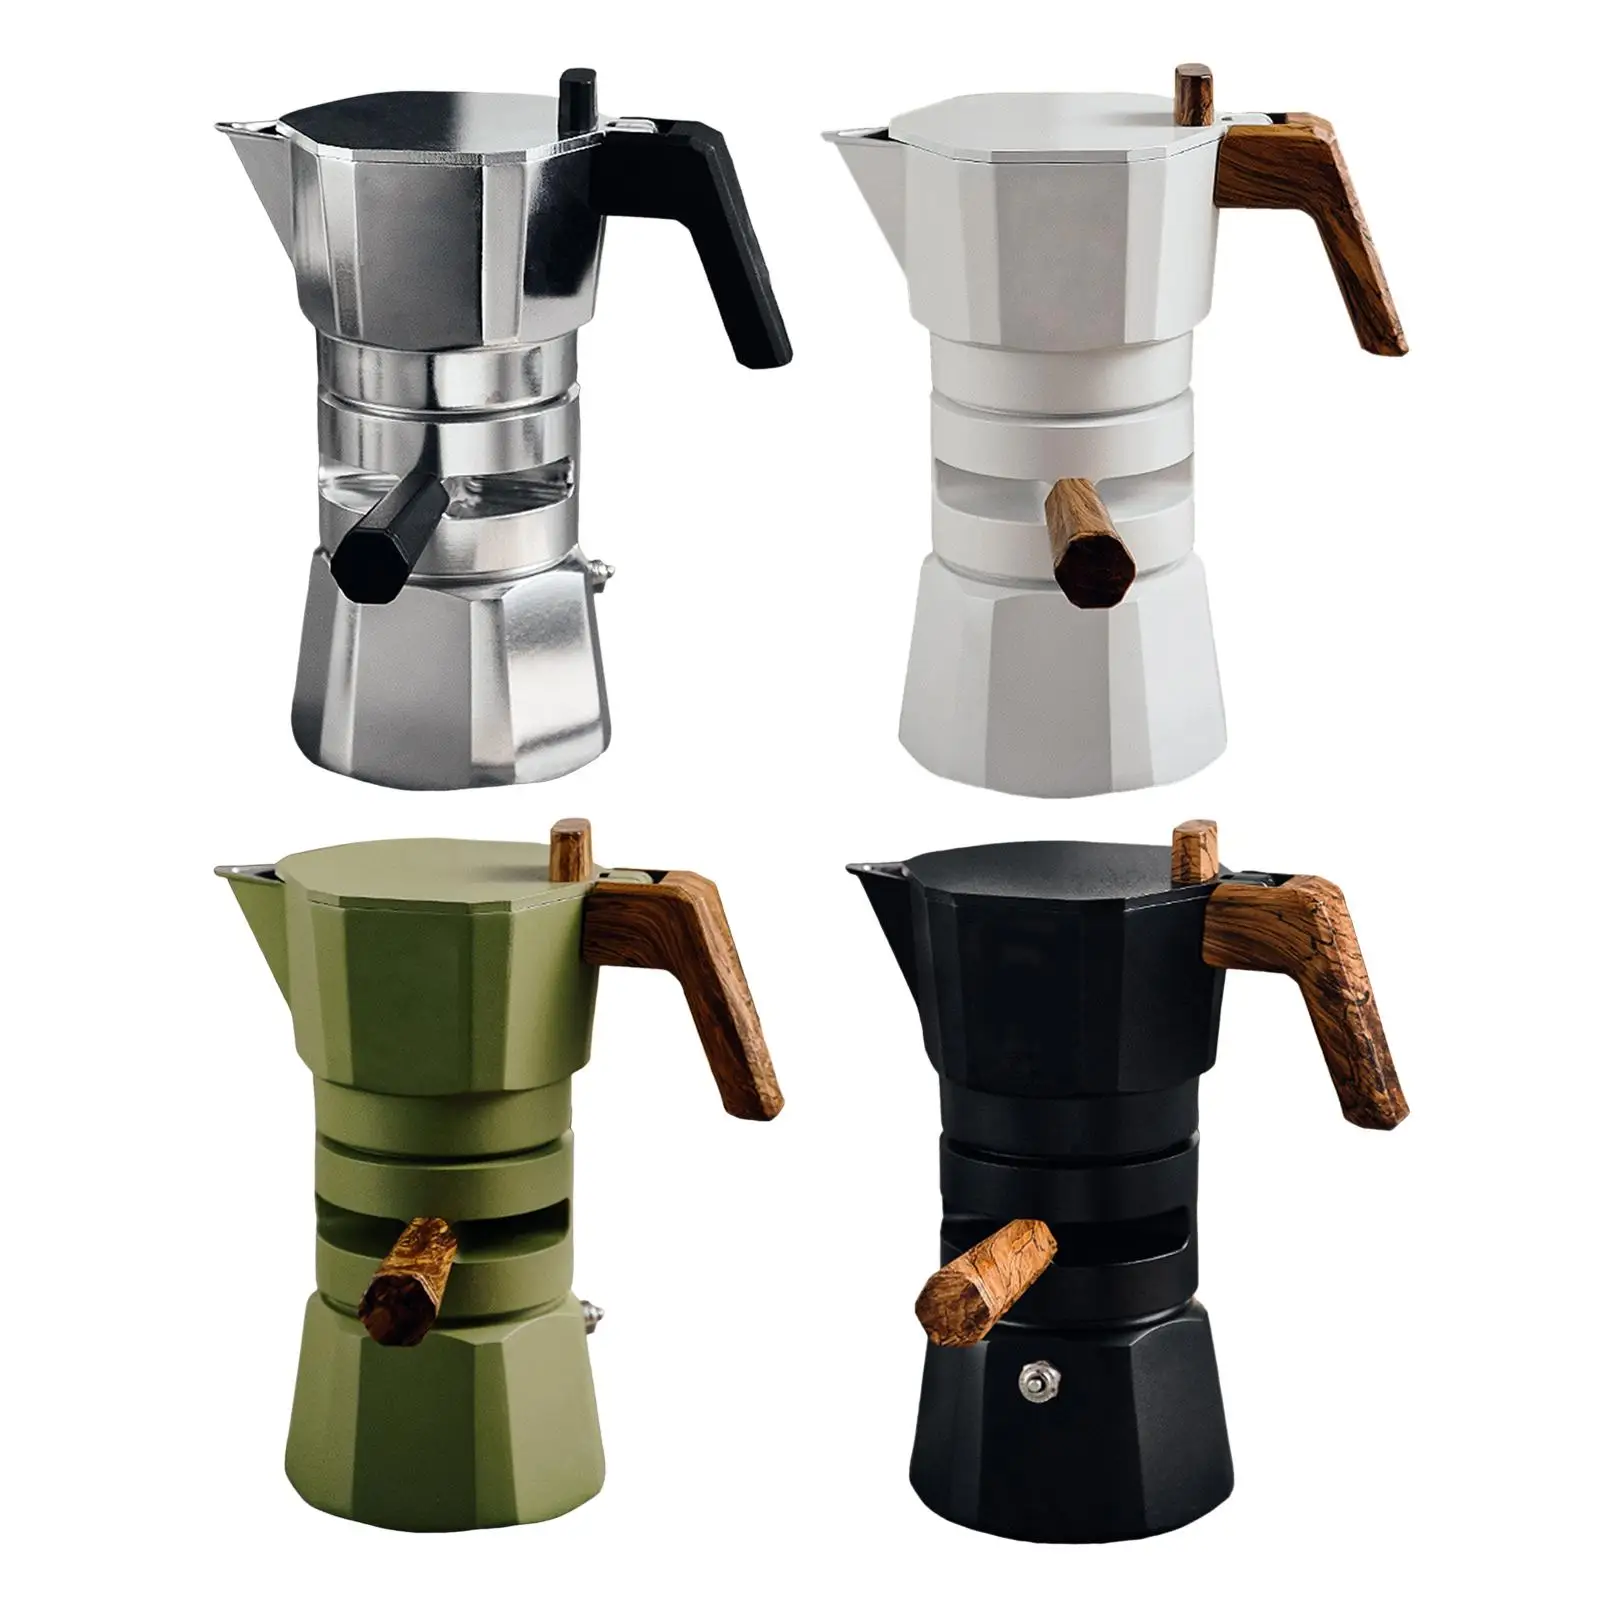 Coffee Maker Pot Makes Delicious Coffee Durable Coffee Machine Easy to Use Coffee Maker for Office Kitchen Travel Home